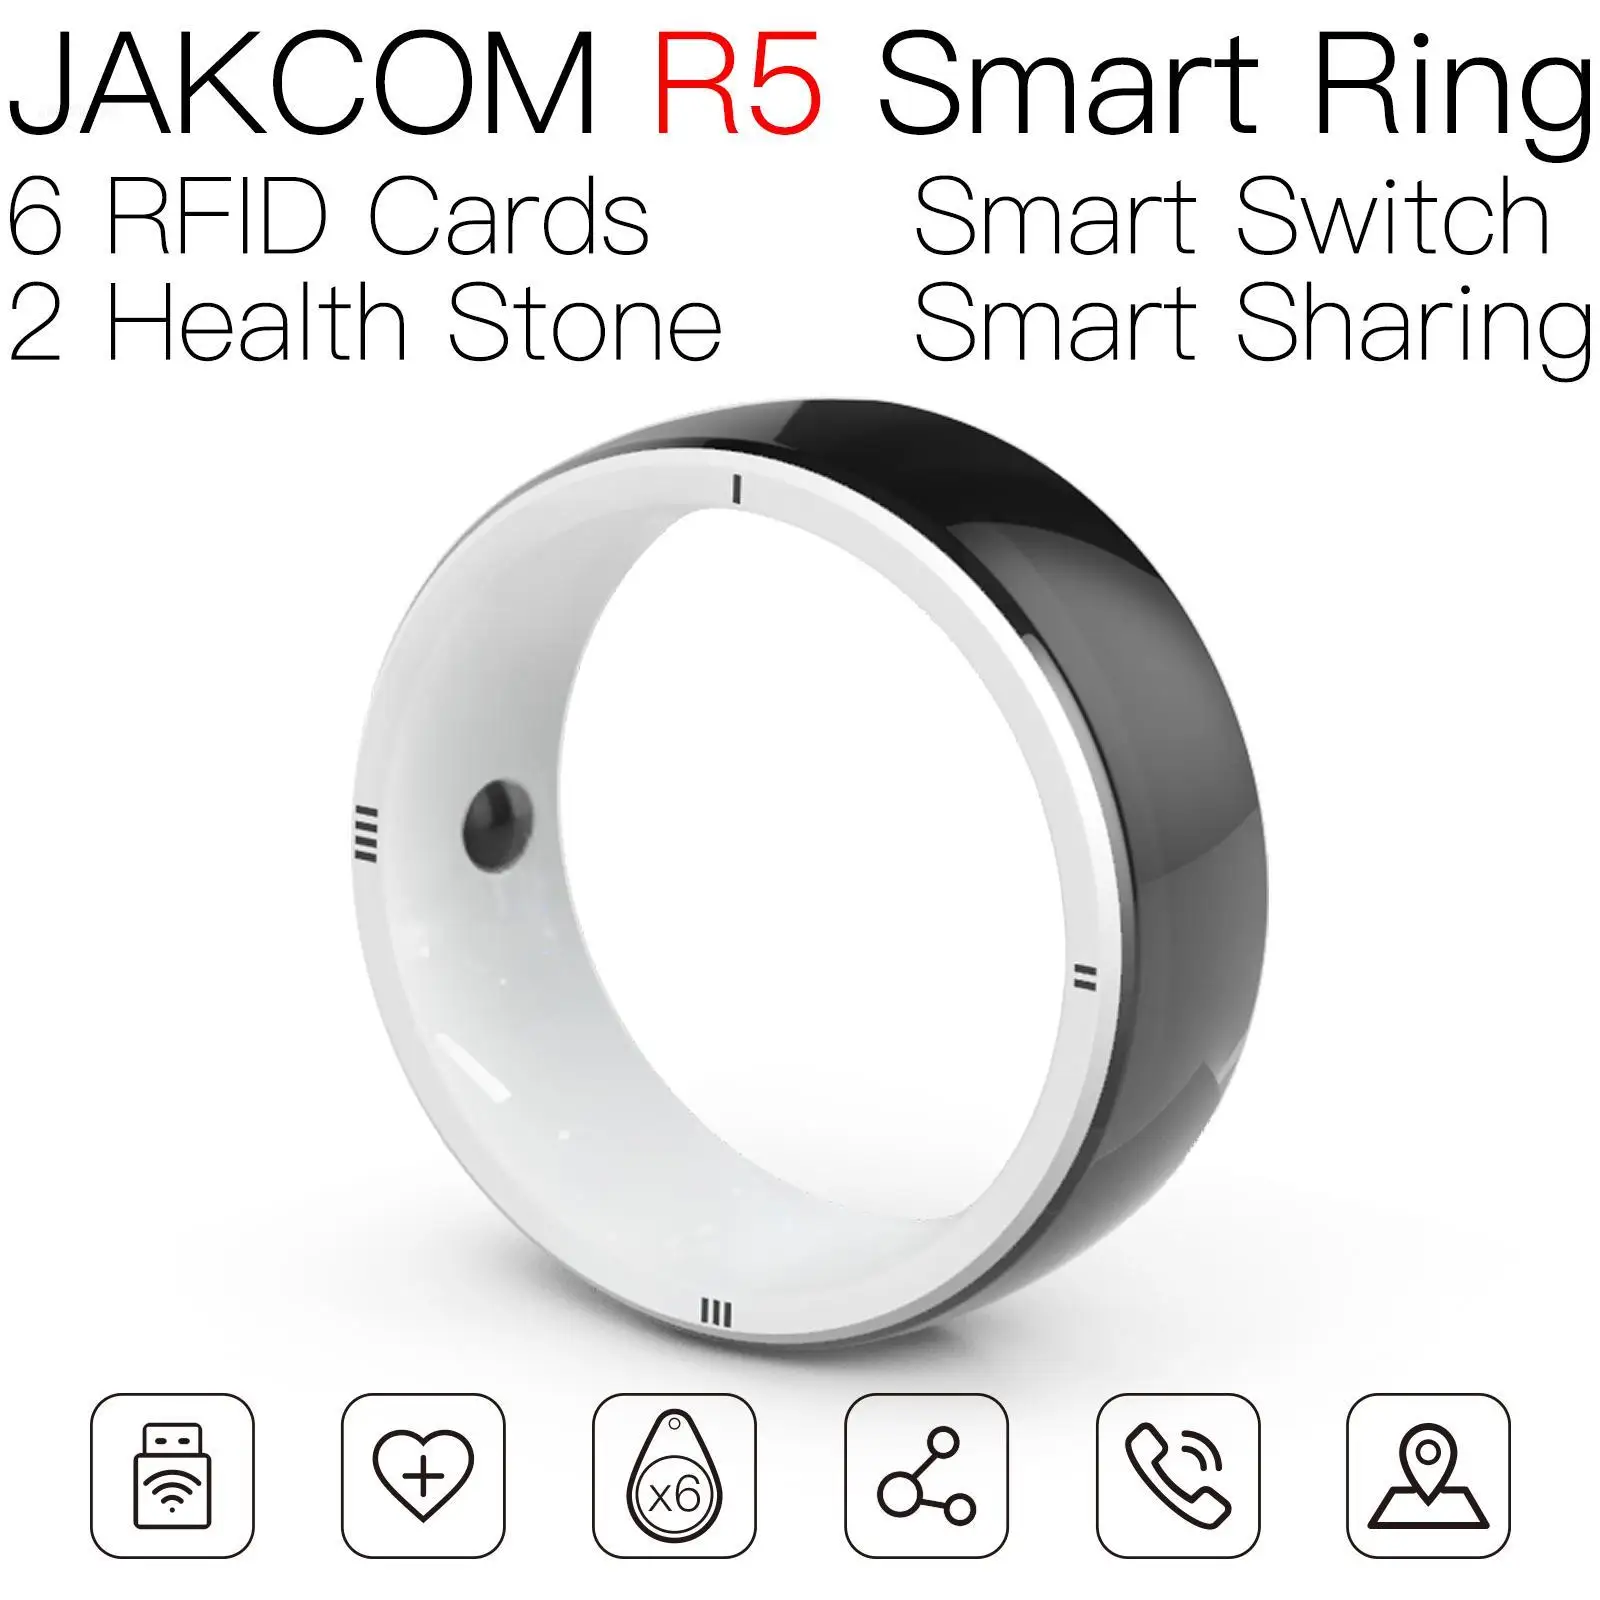 

JAKCOM R5 Smart Ring Nice than rfid butyon laundry nfc tags lable classic 1k uid writable smart tag white card chip iso